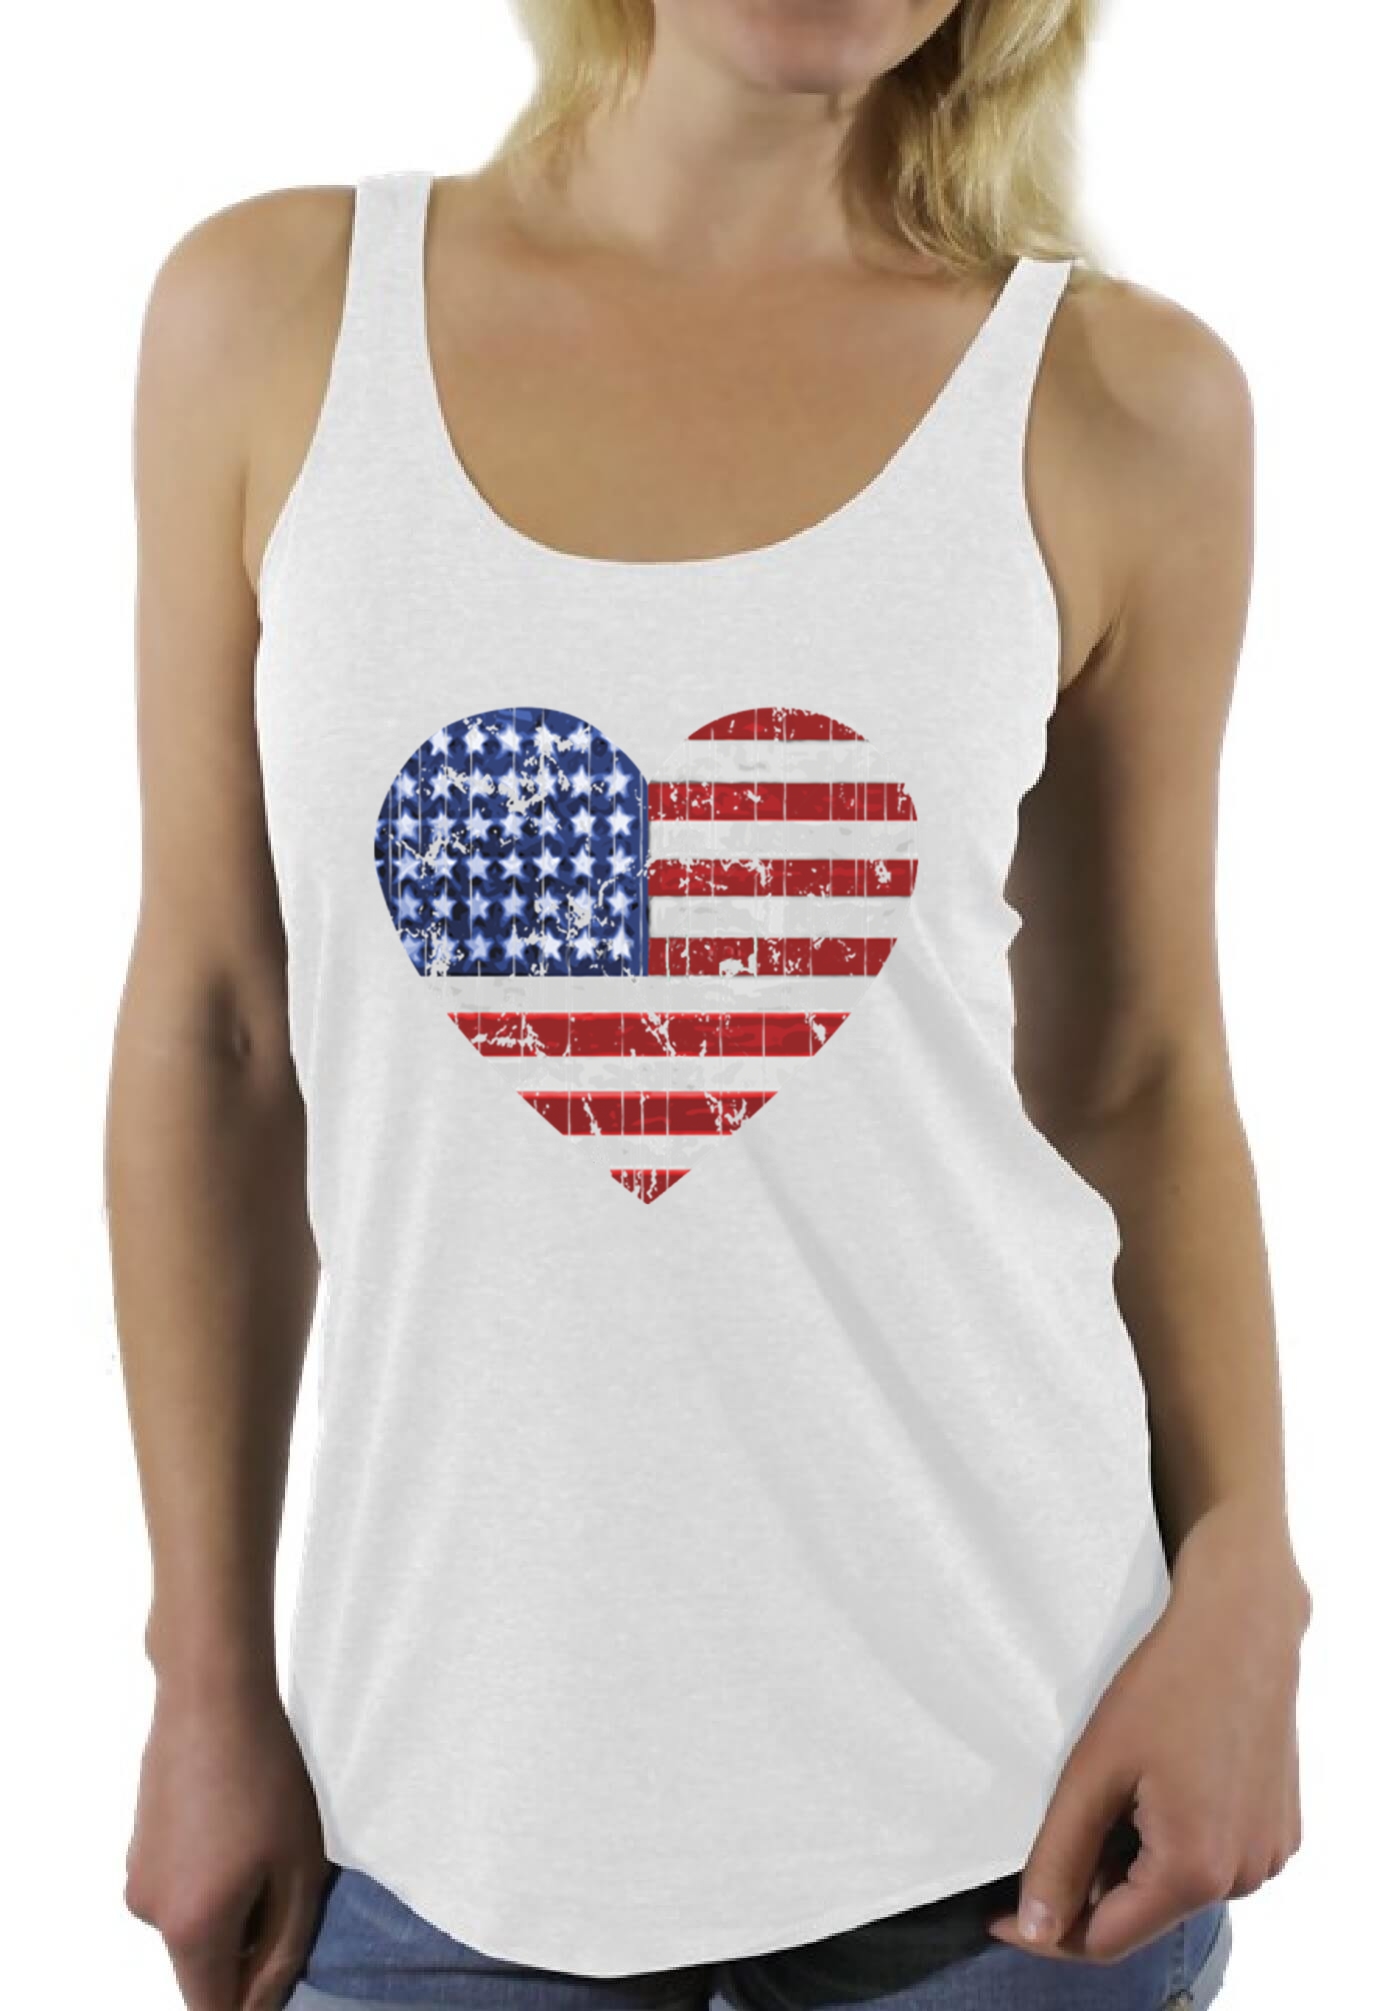 USA Flag Heart Distressed Women's Racerback Tank Tops 4th of July USA ...